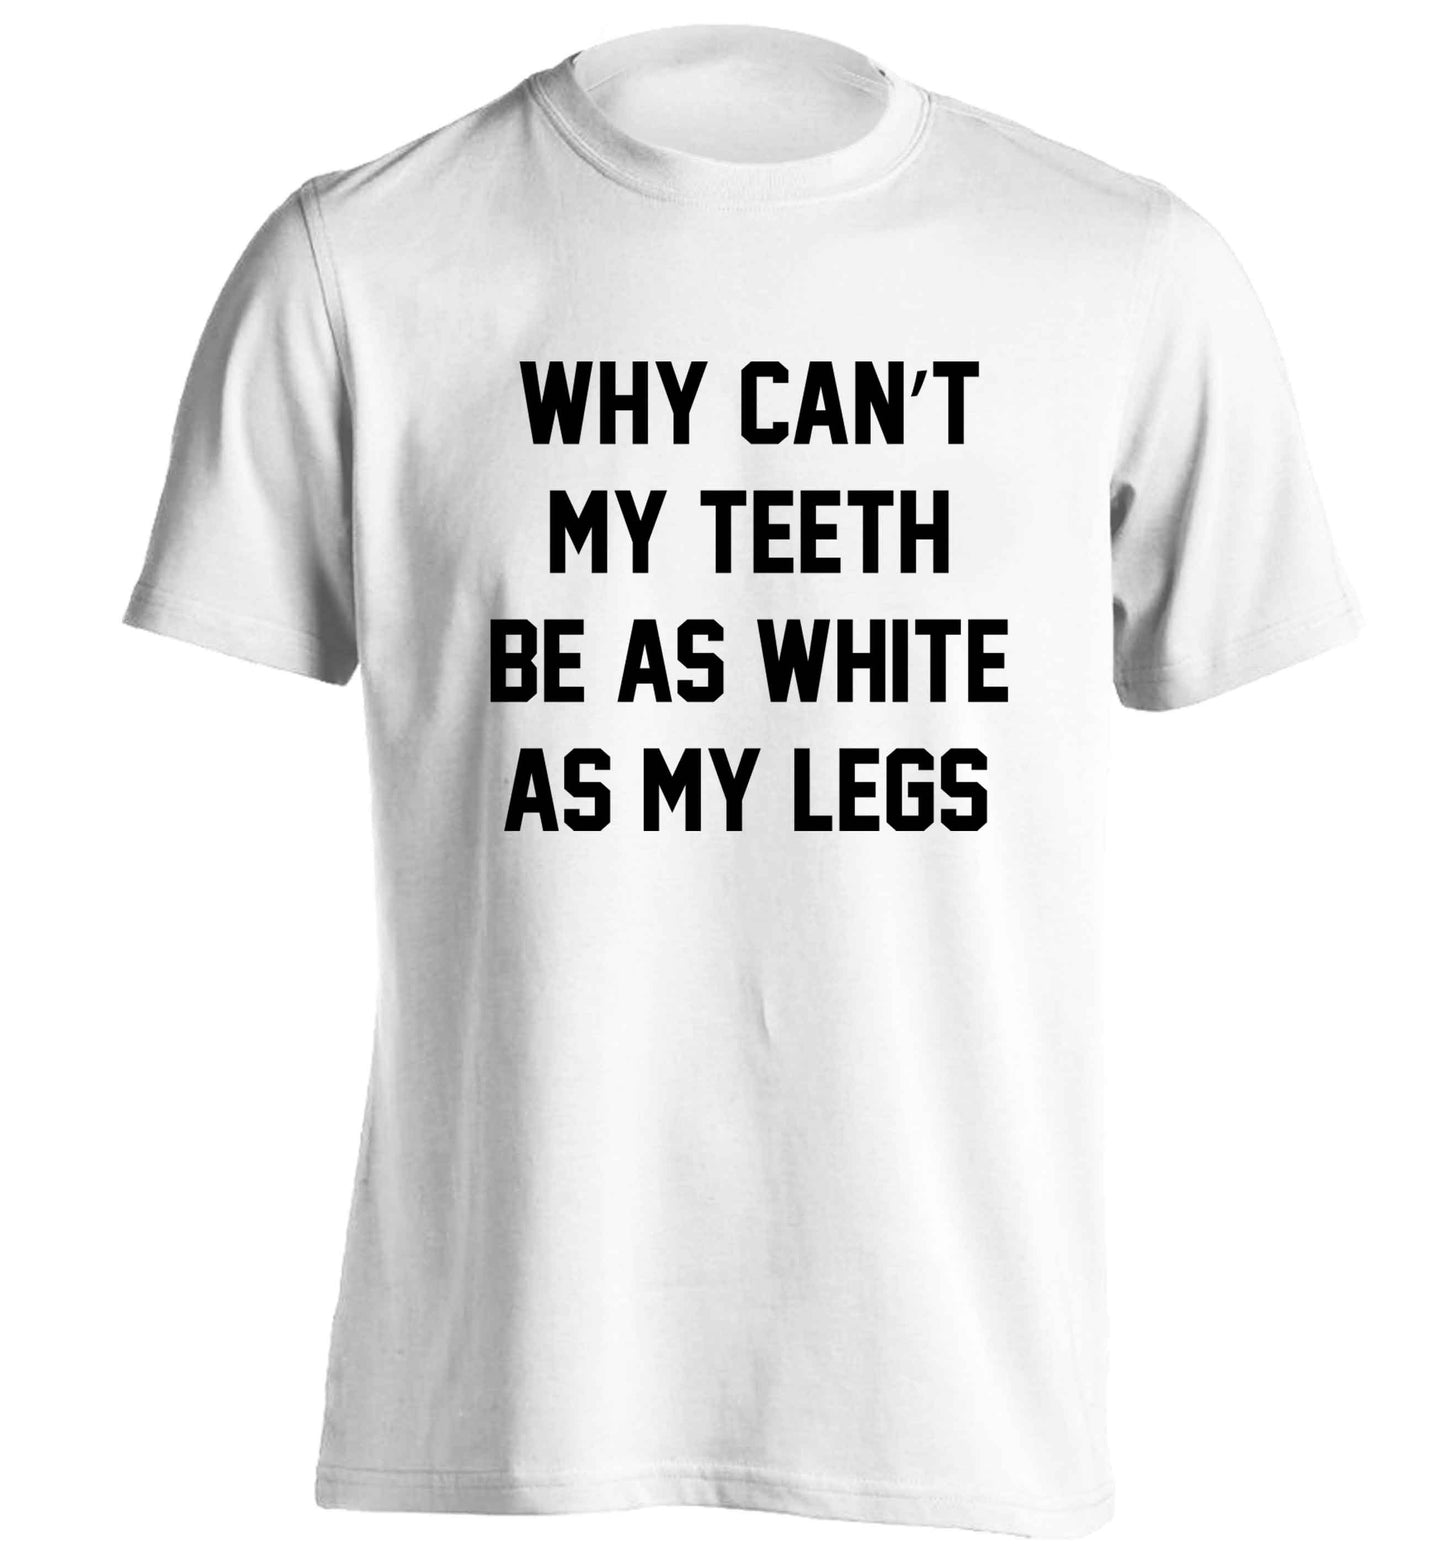 Why can't my teeth be as white as my legs adults unisex white Tshirt 2XL